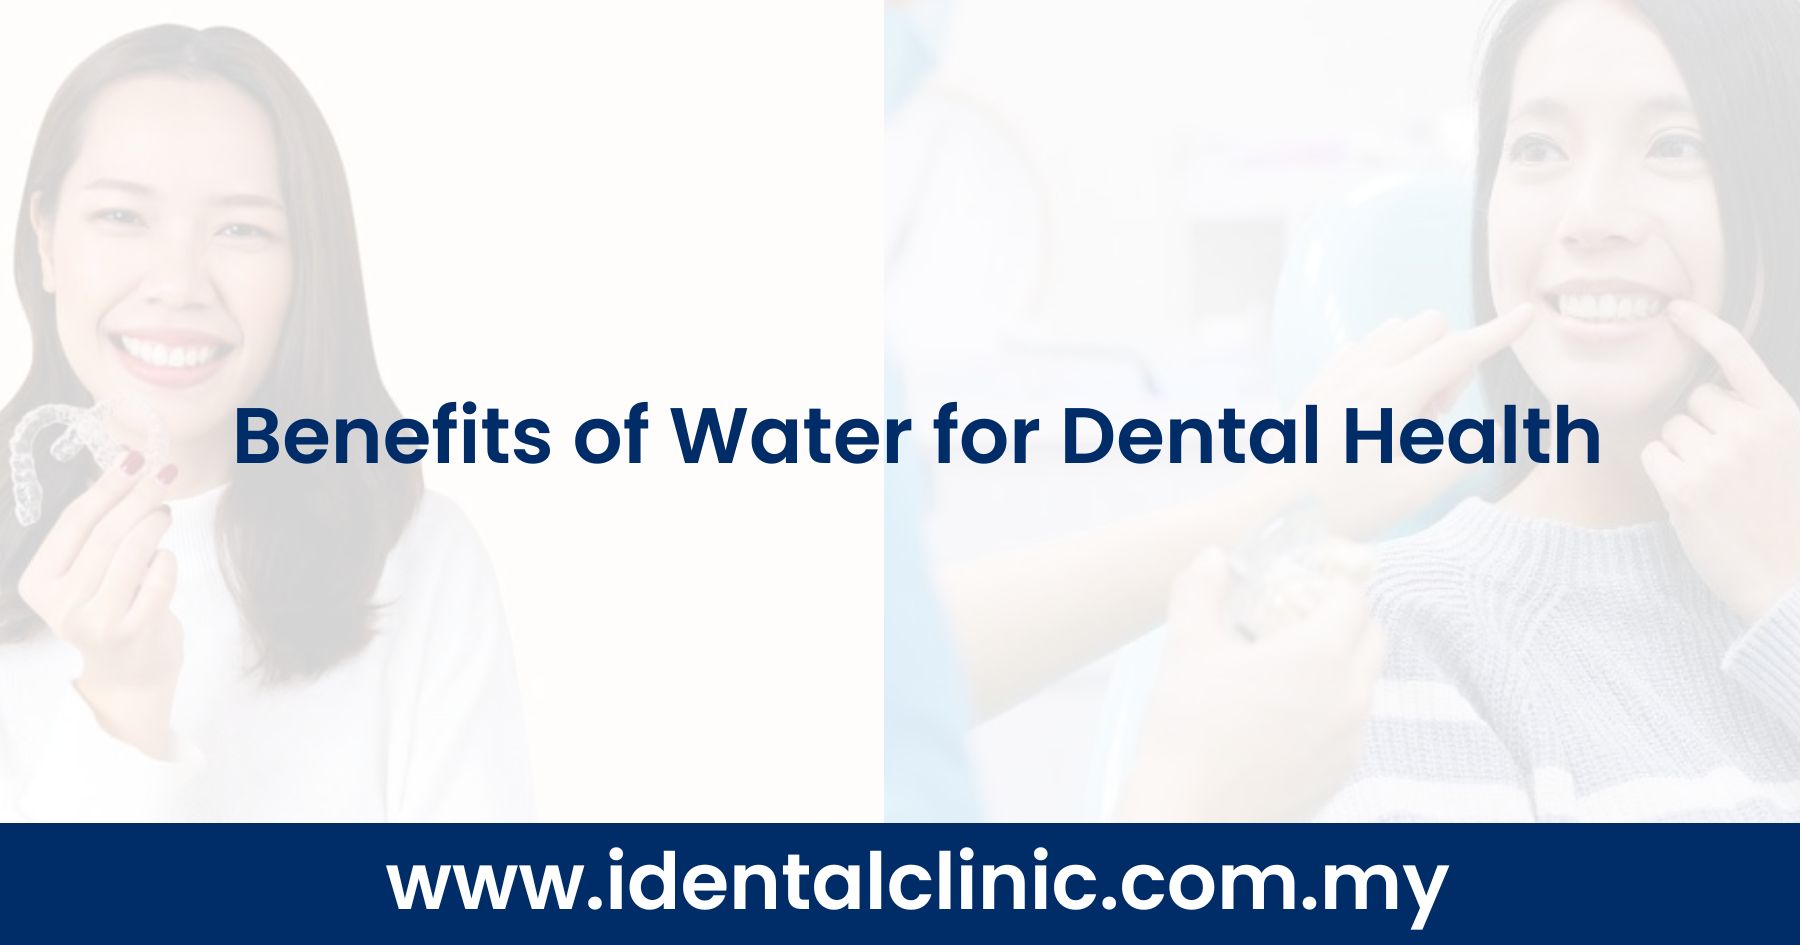 Benefits of Water for Dental Health